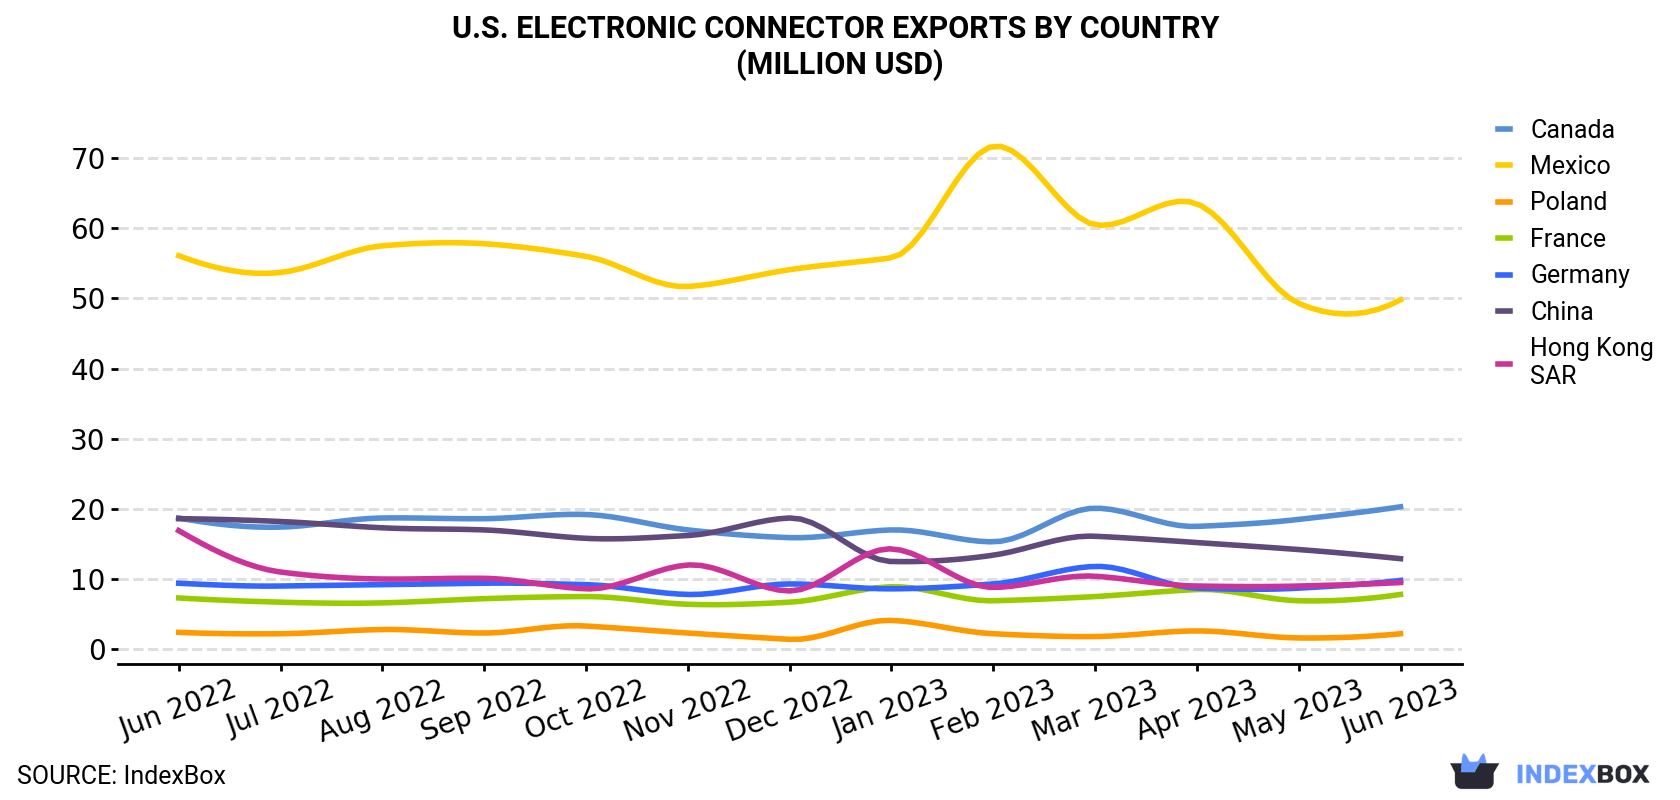 U.S. Electronic Connector Exports By Country (Million USD)